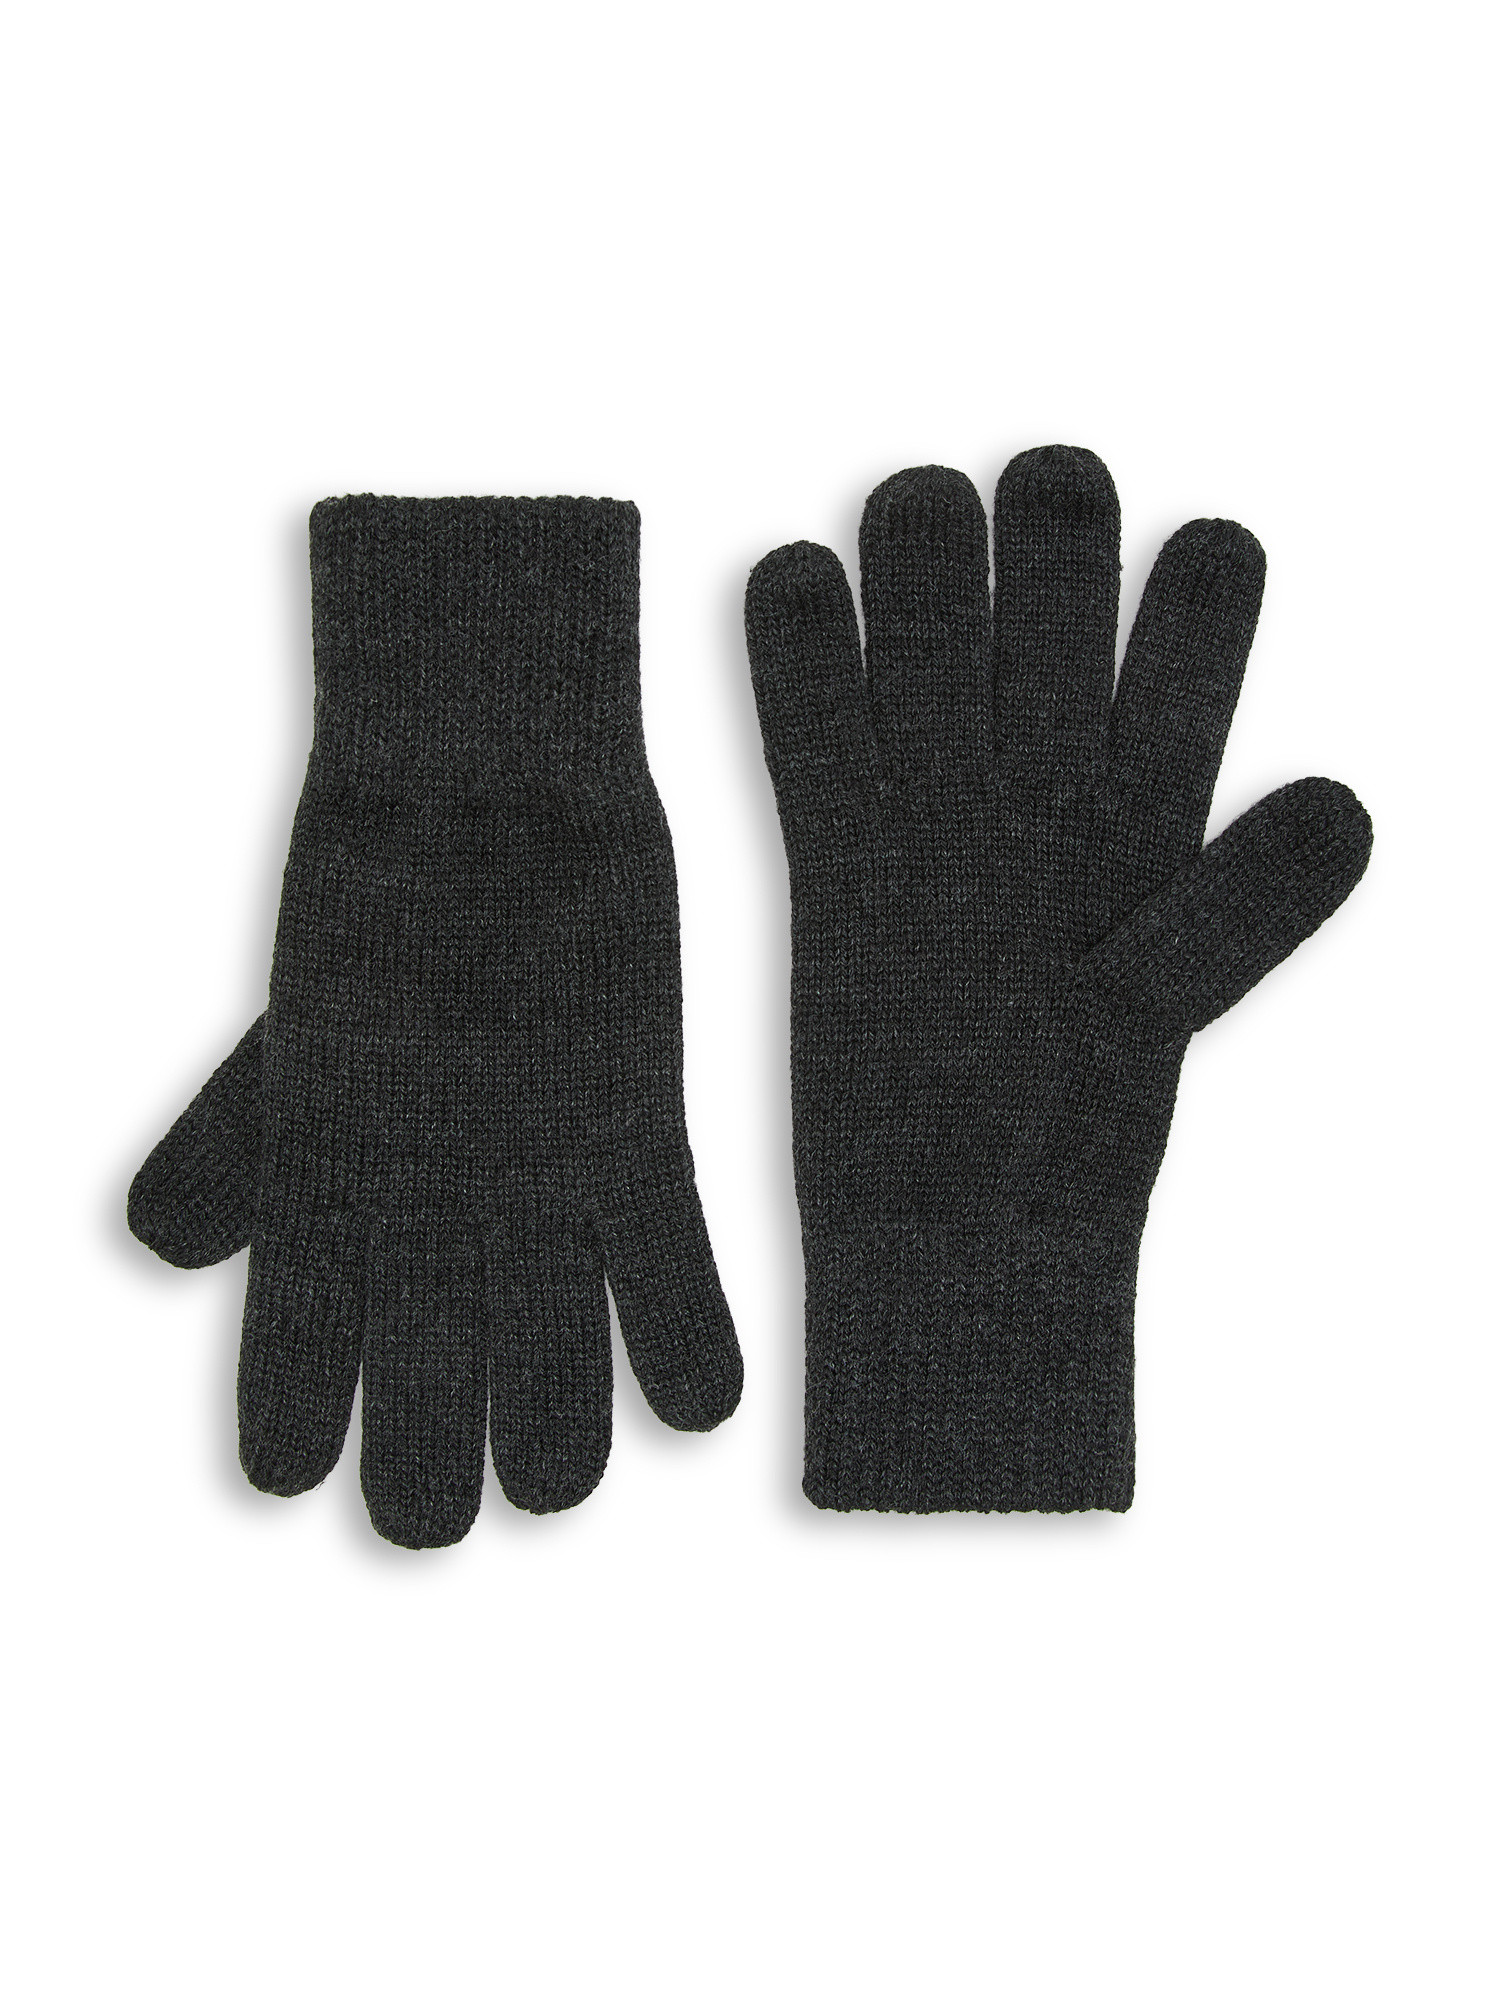 Luca D'Altieri - Basic knitted gloves, Anthracite, large image number 0